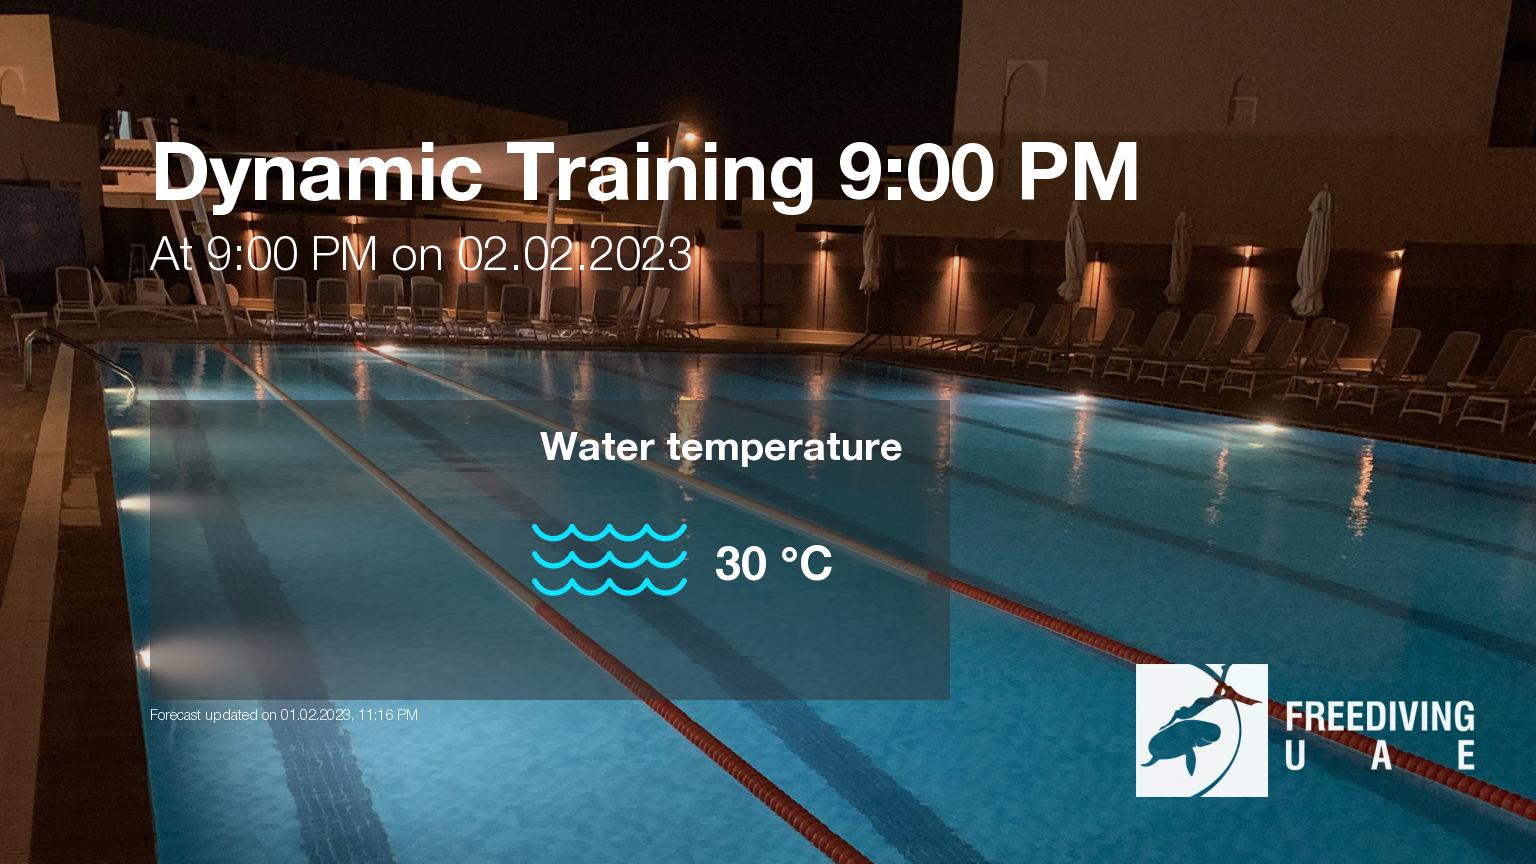 Expected weather during Dynamic Training 9:00 PM on Thu, Feb 2, at 9:00 PM